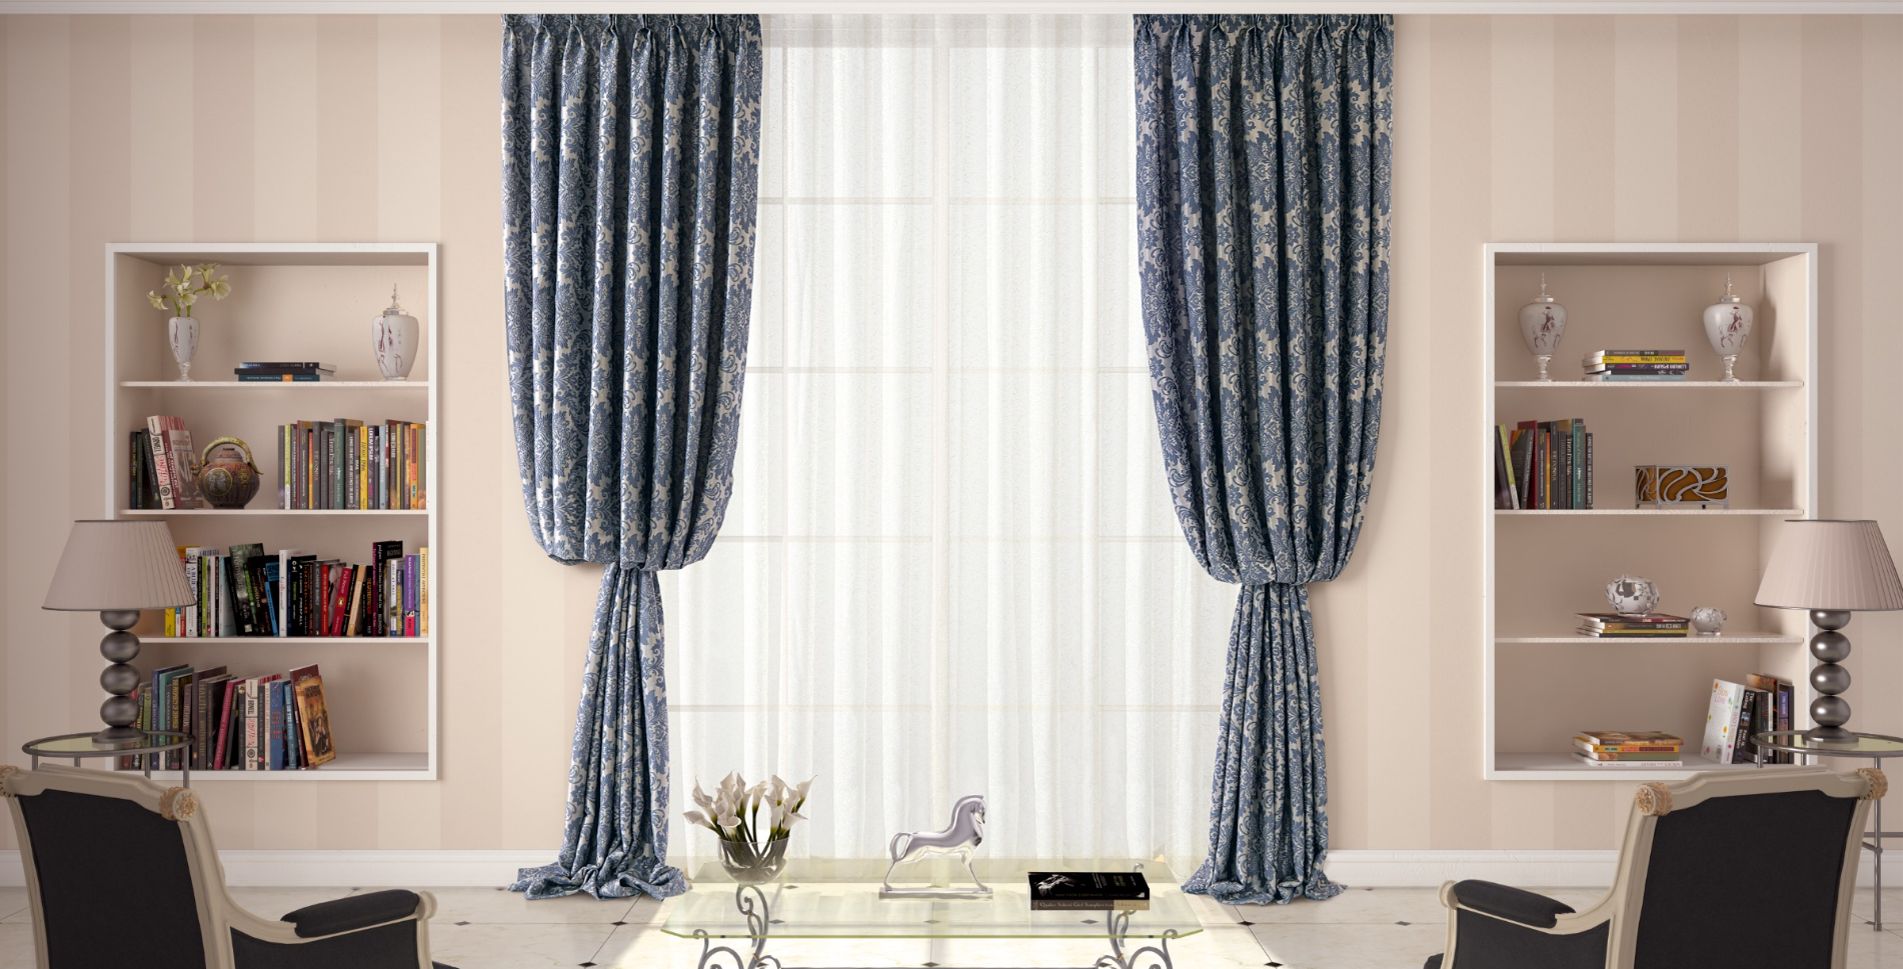 How to Choose a Curtain?